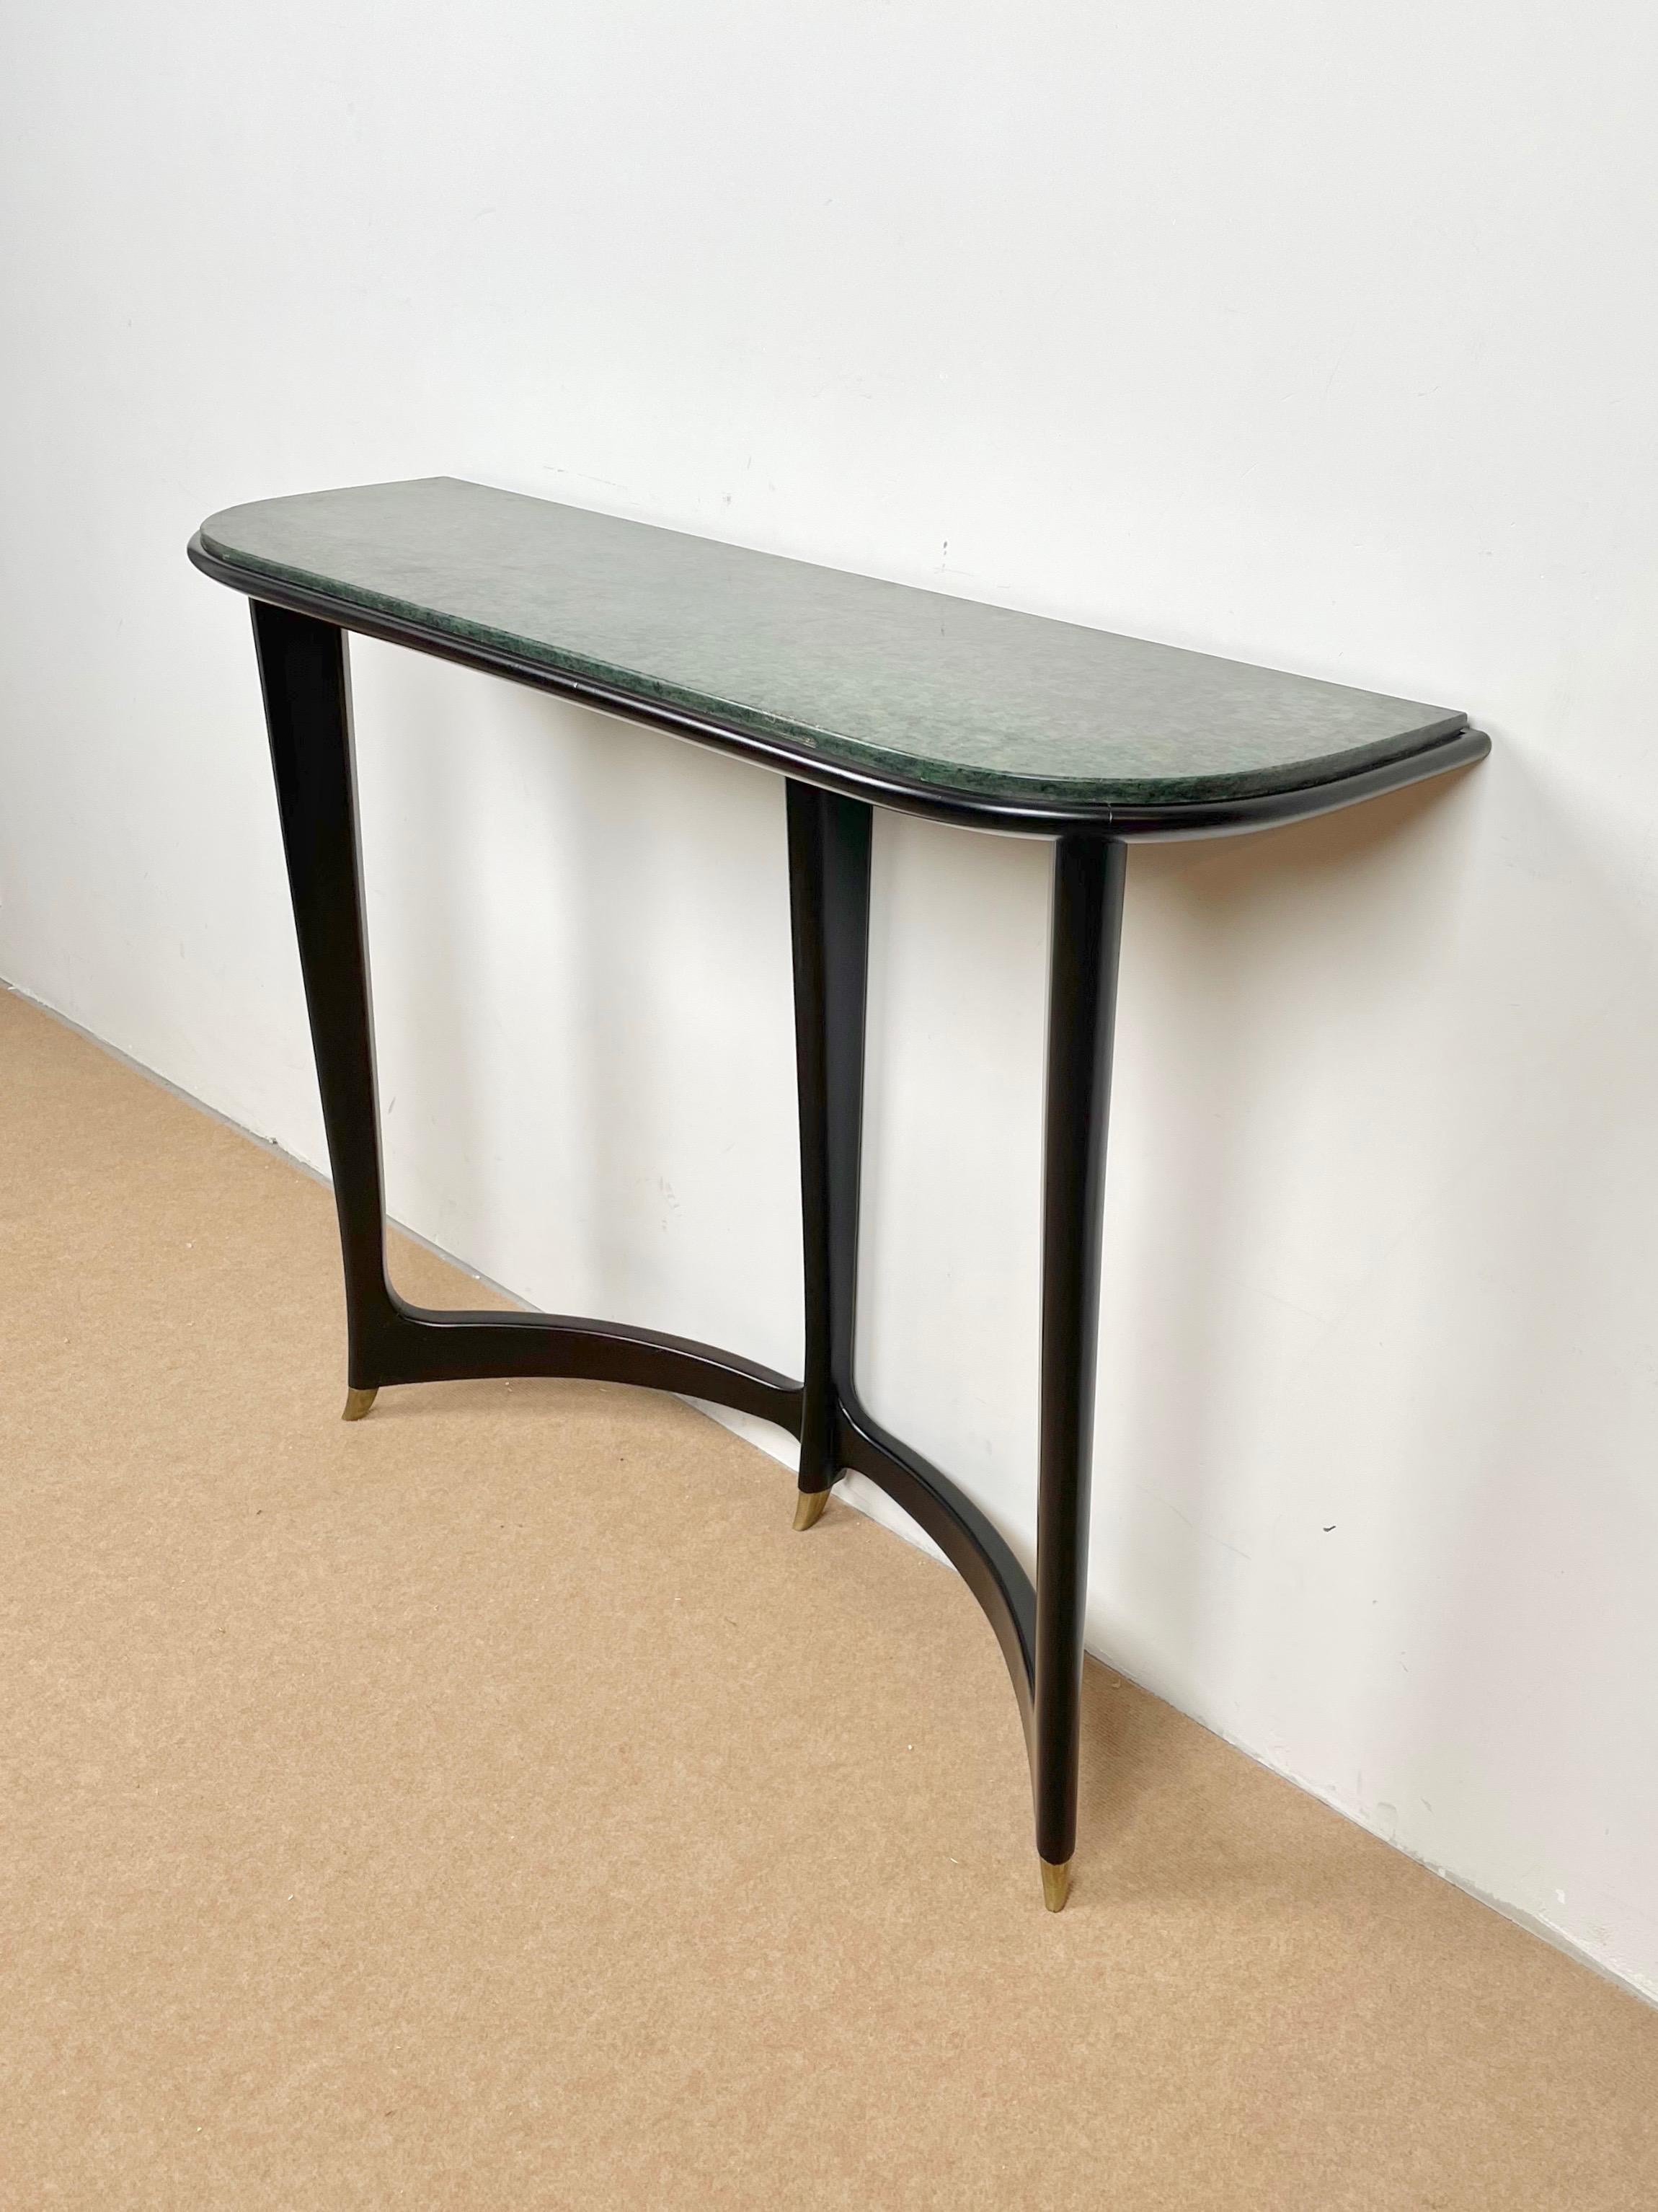 Mid-Century Modern Console Table Wood, Brass & Green Marble by Guglielmo Ulrich, Italy, 1940s For Sale